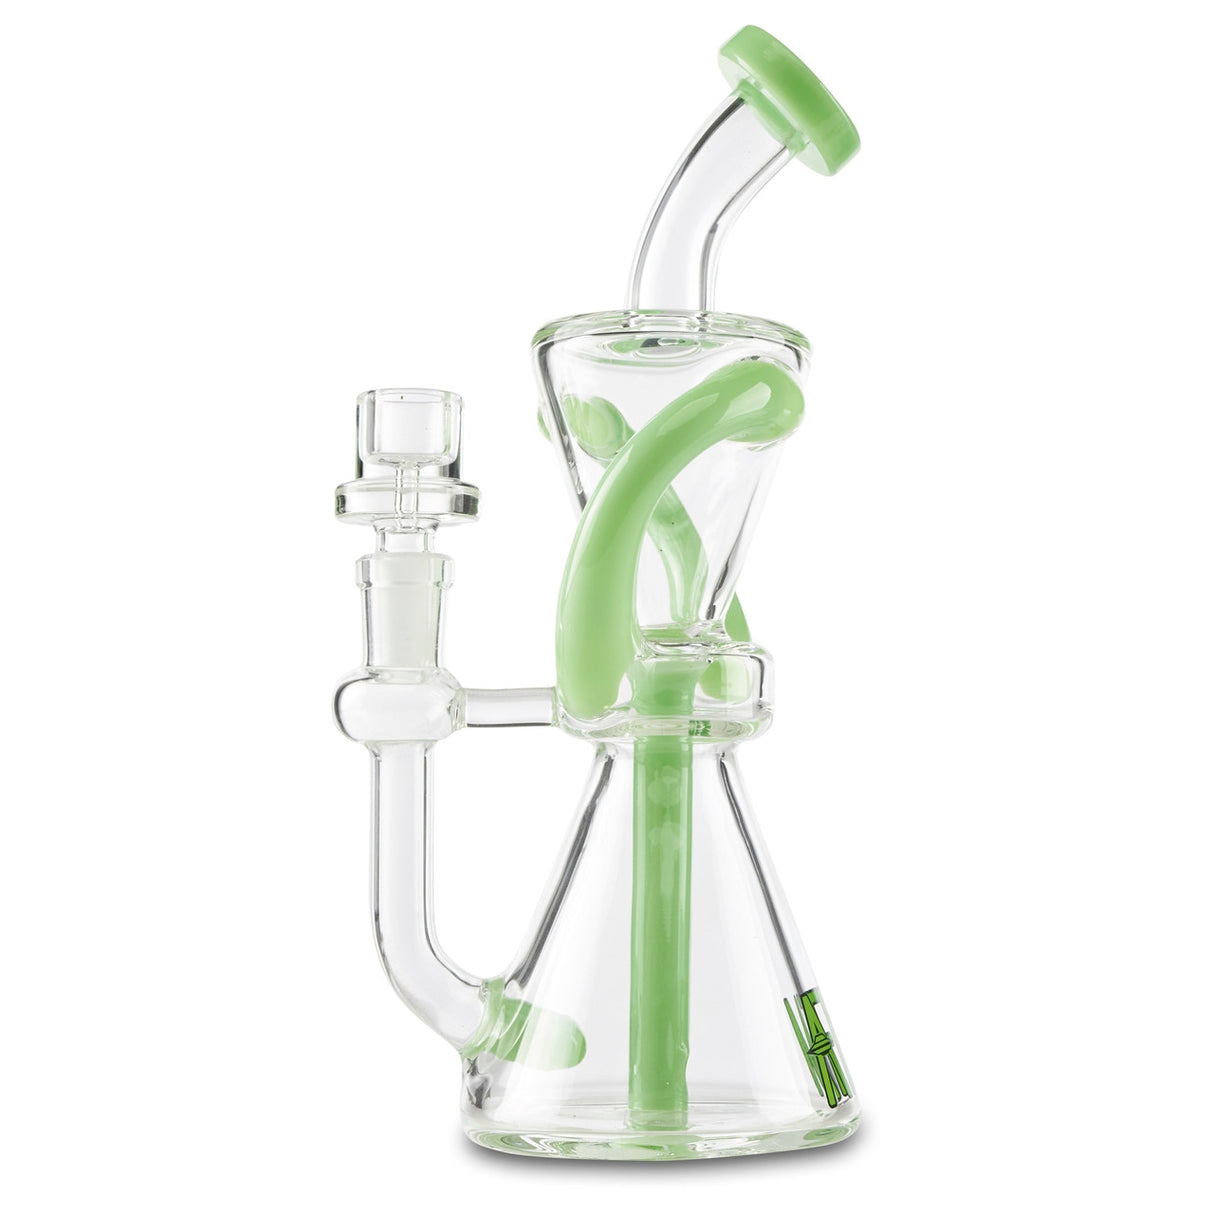 AFM Double Arm Recycler